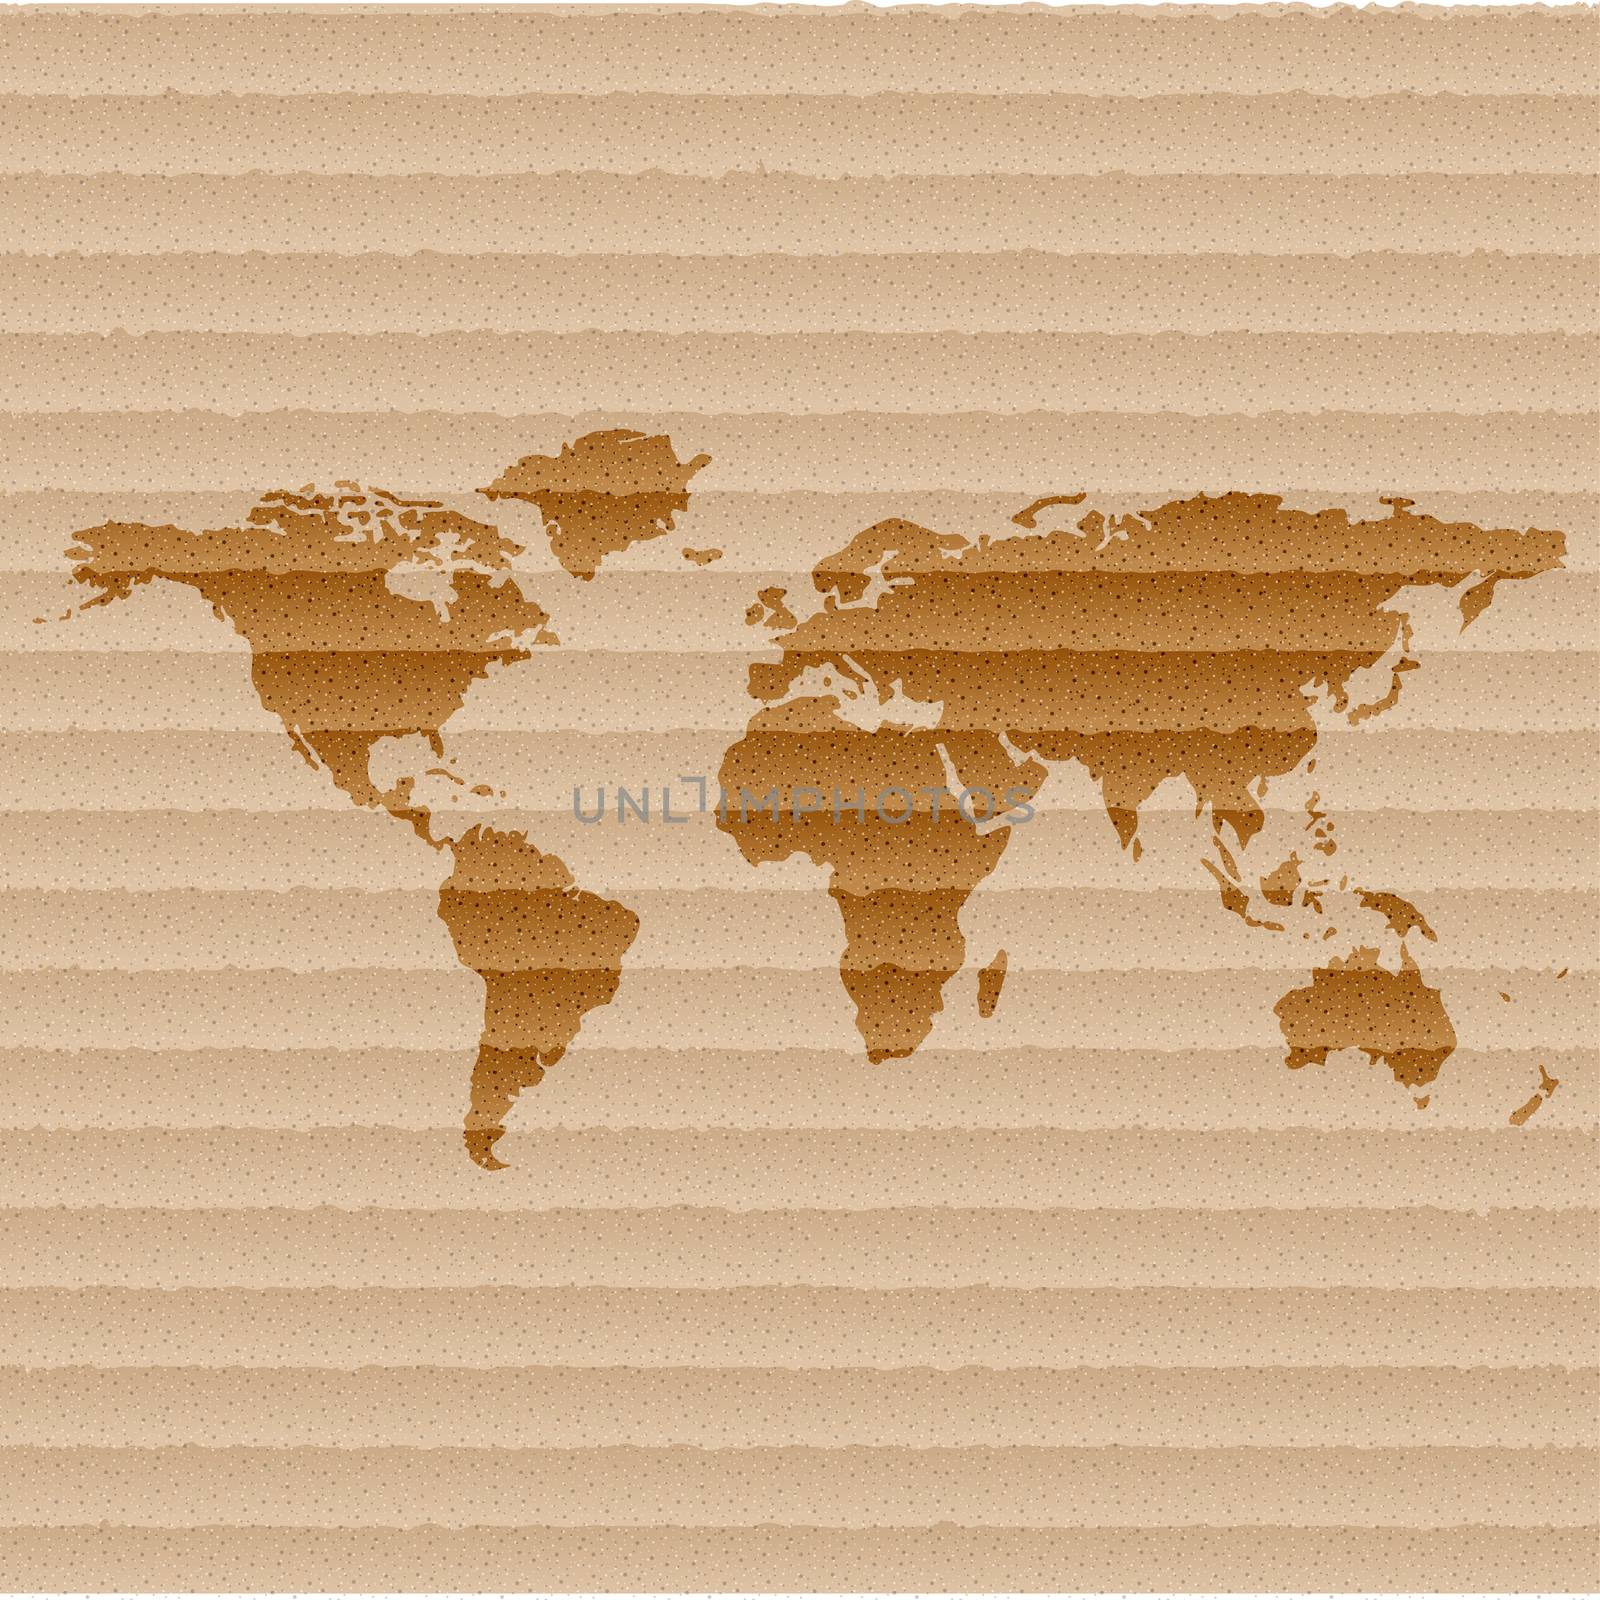 Detailed the most finest world map. flat design by serhii_lohvyniuk